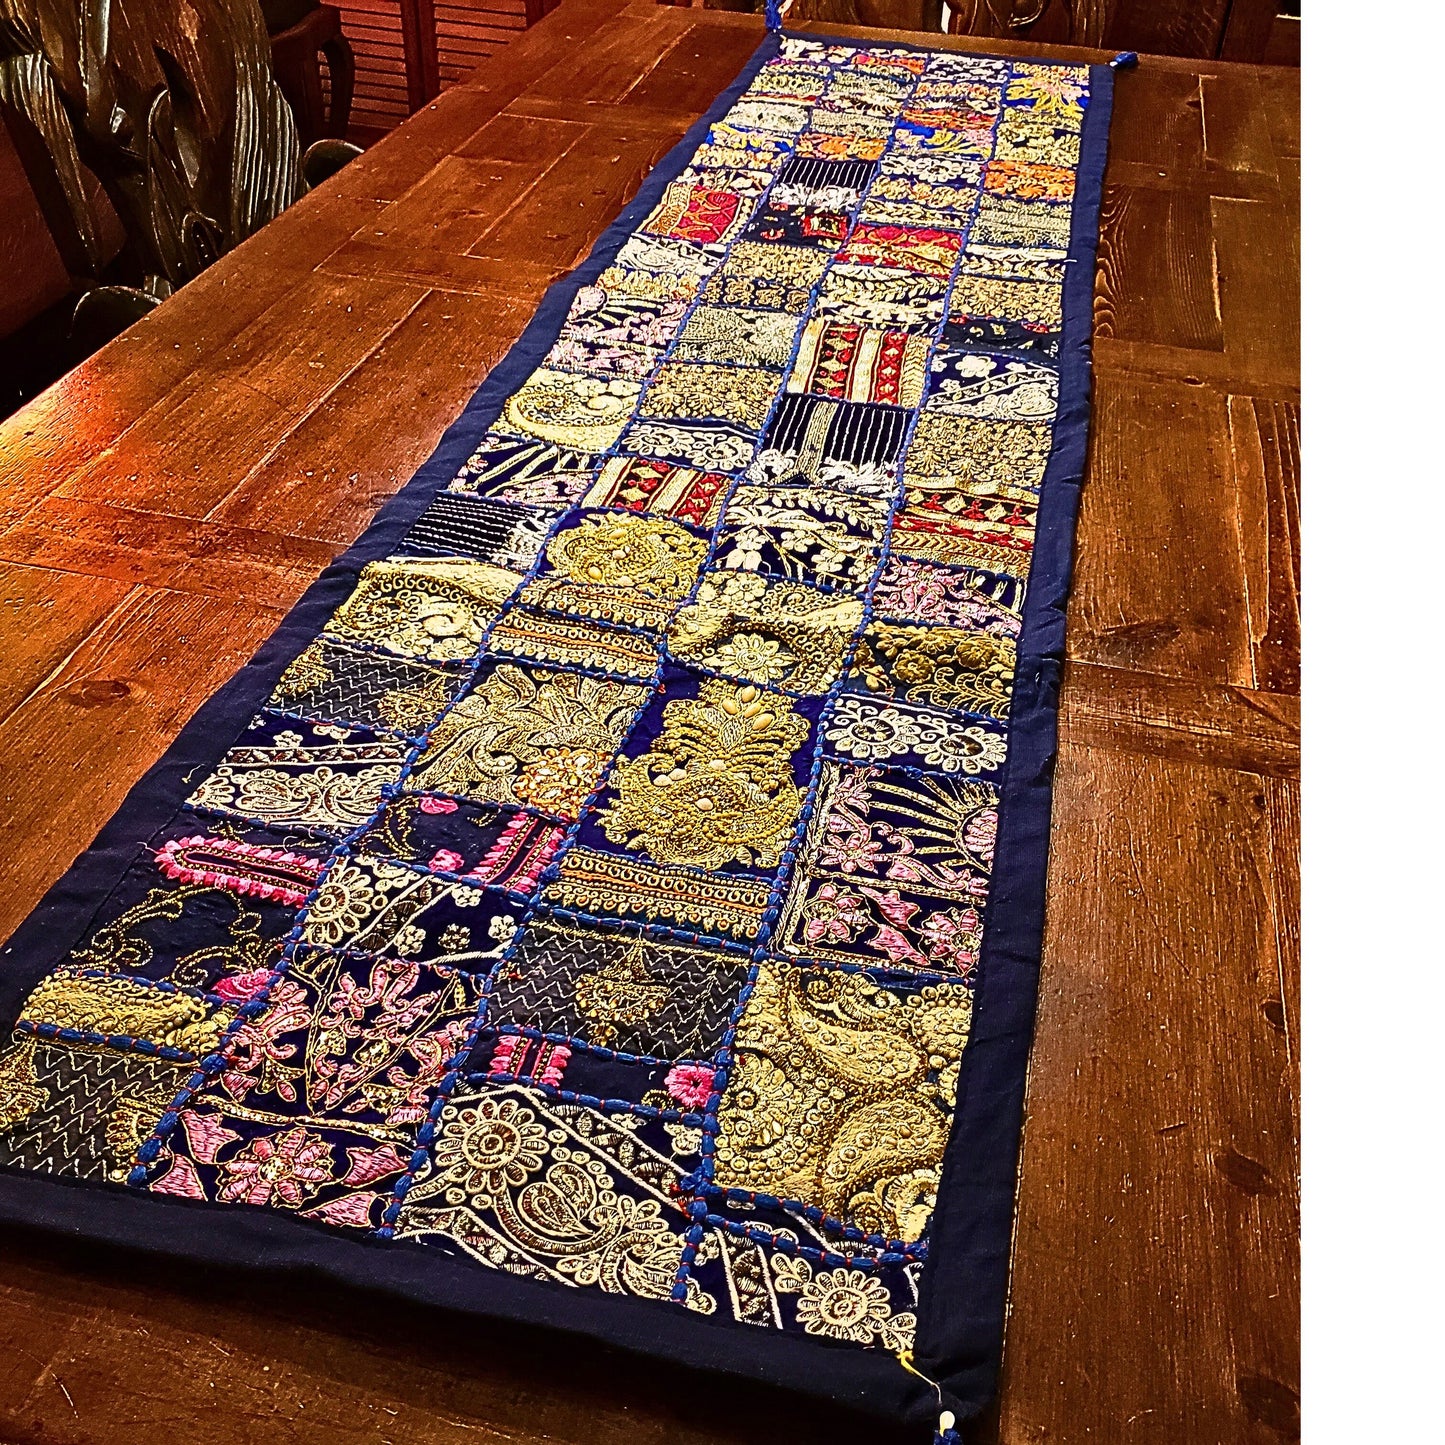 Handmade Gujarat Embroidered & Jeweled Table Runner & 6 Matching Placemat Set -Blues